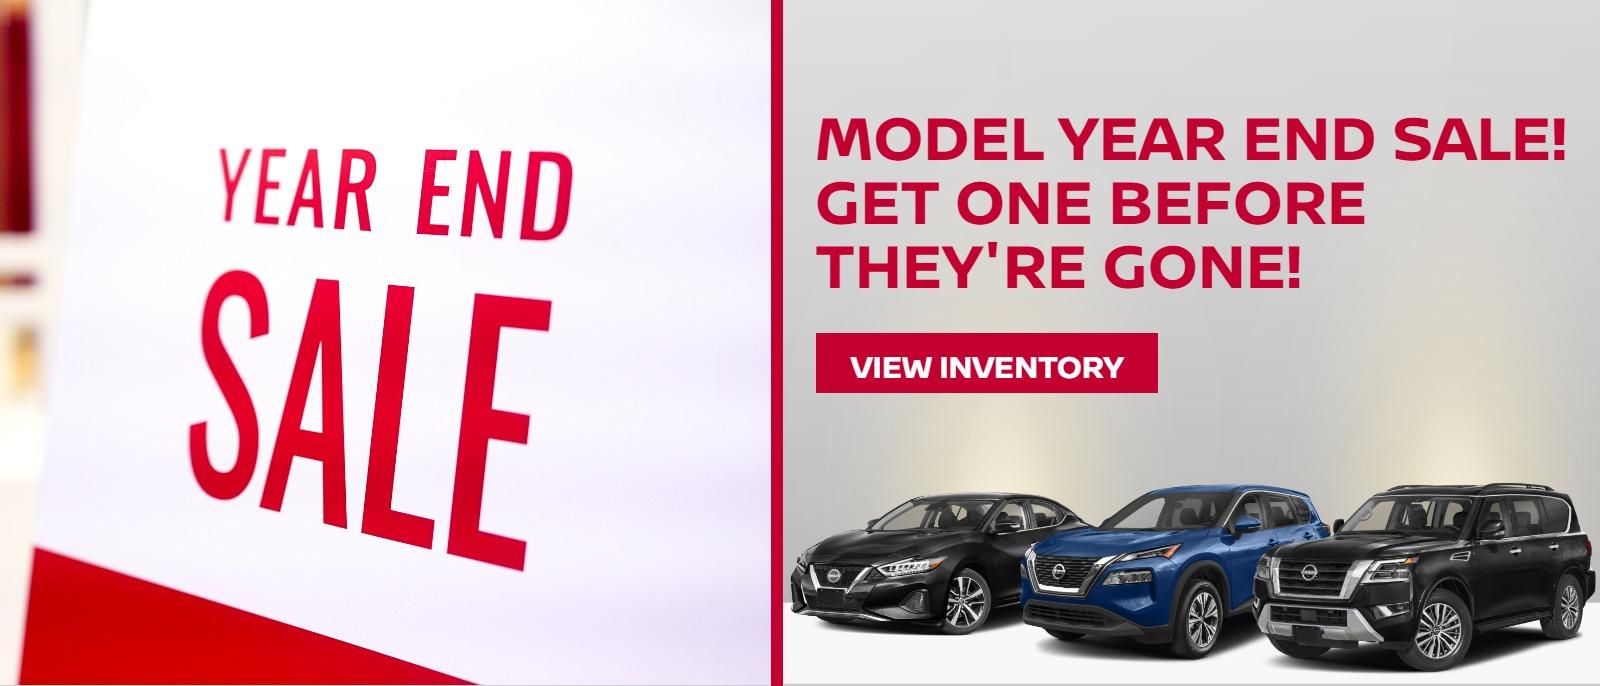 Model Year End Sale! Get one before they're gone!